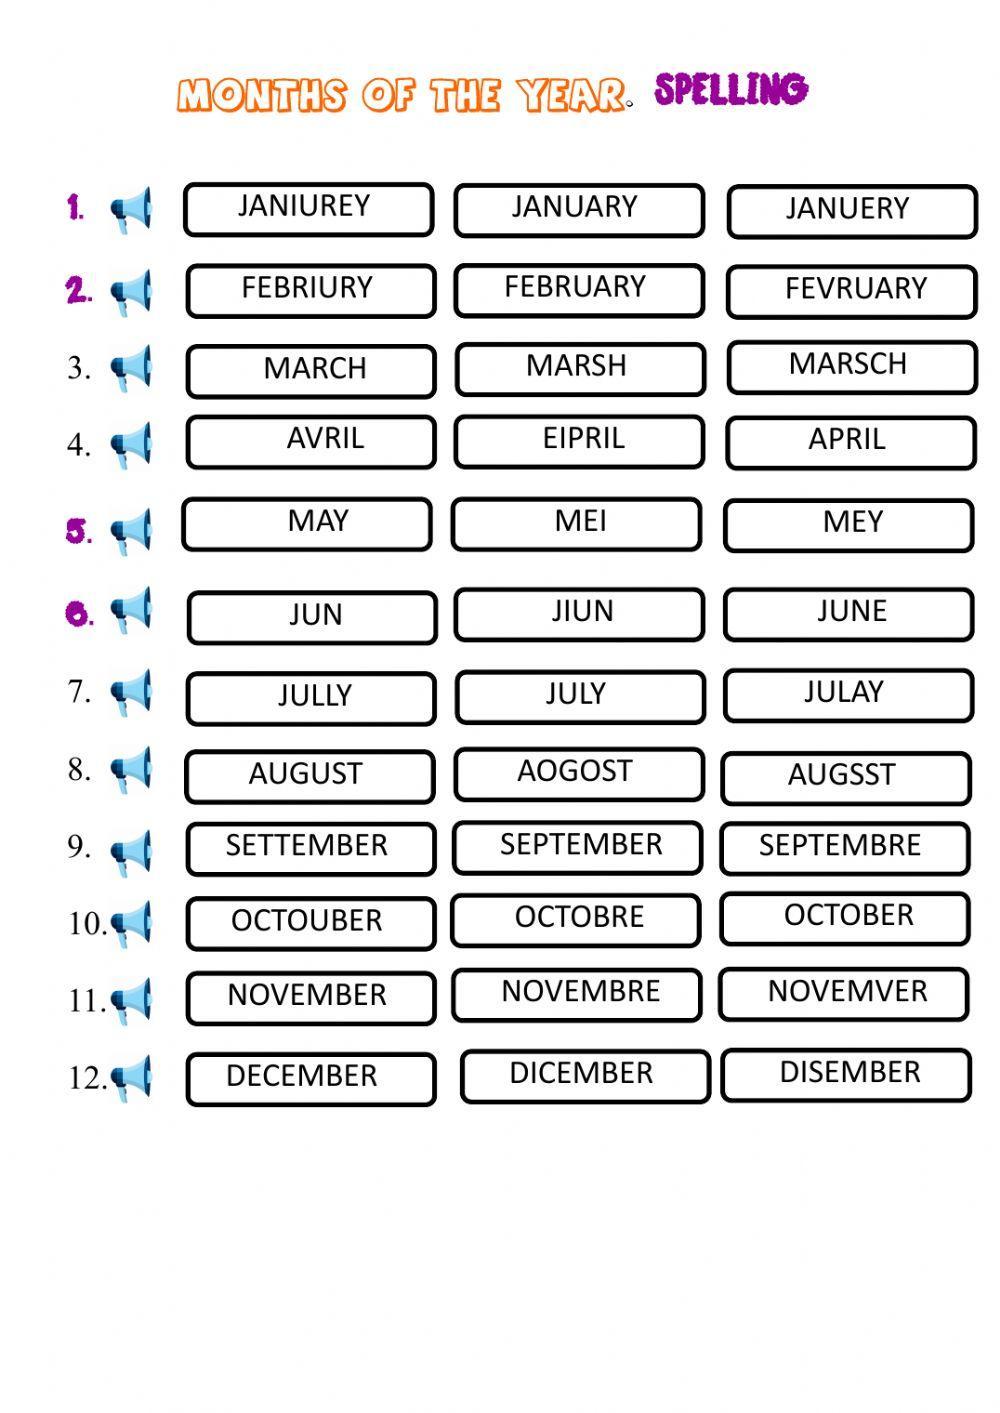 Months of the year. Spelling